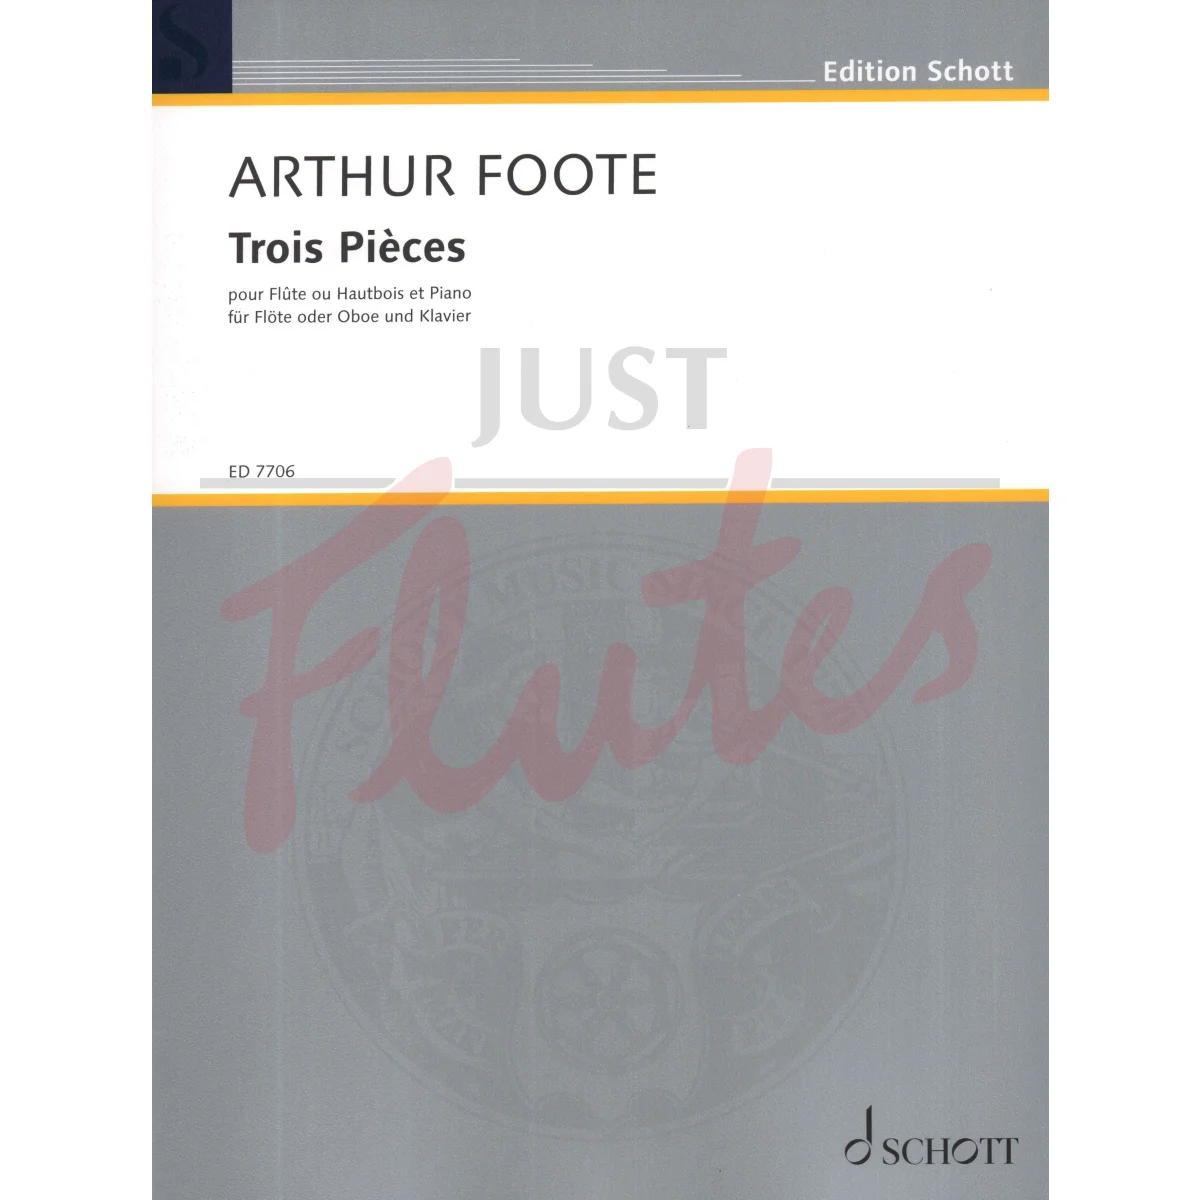 Trois Pièces for Flute/Oboe and Piano